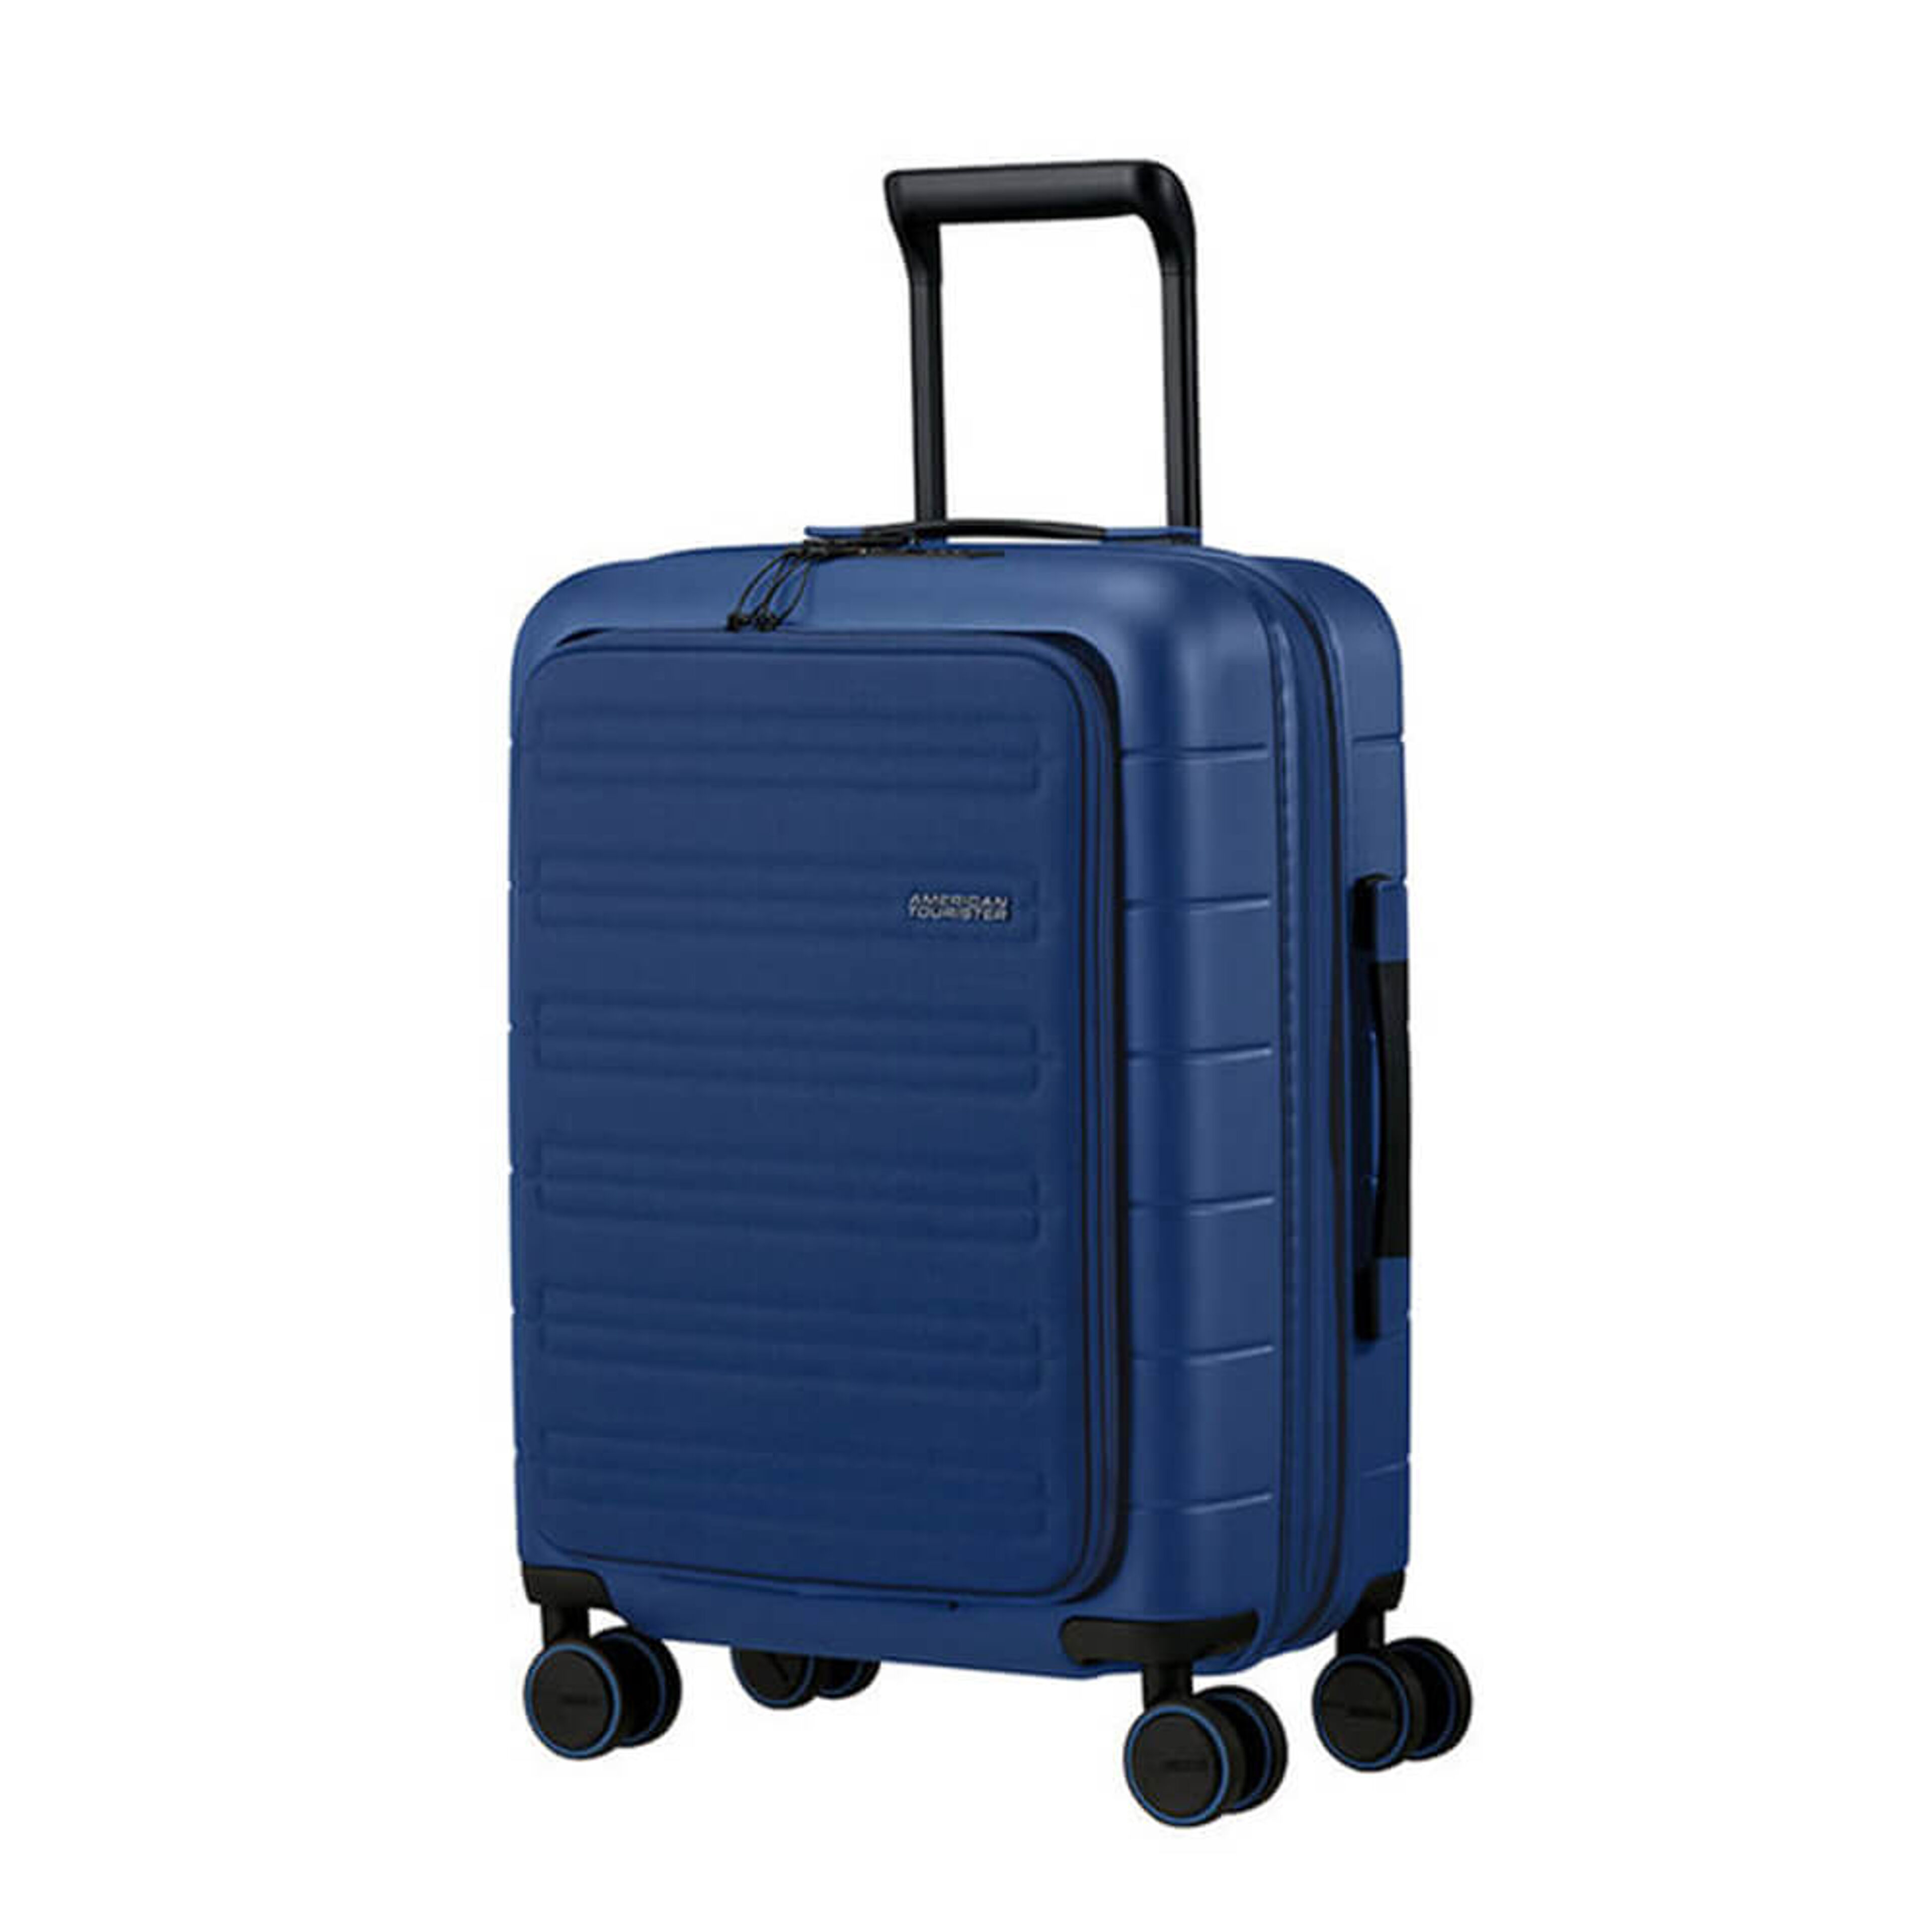 American Tourister - Novastream - Spinner 55 EXP + Laptop Compartment Travel Suitcase